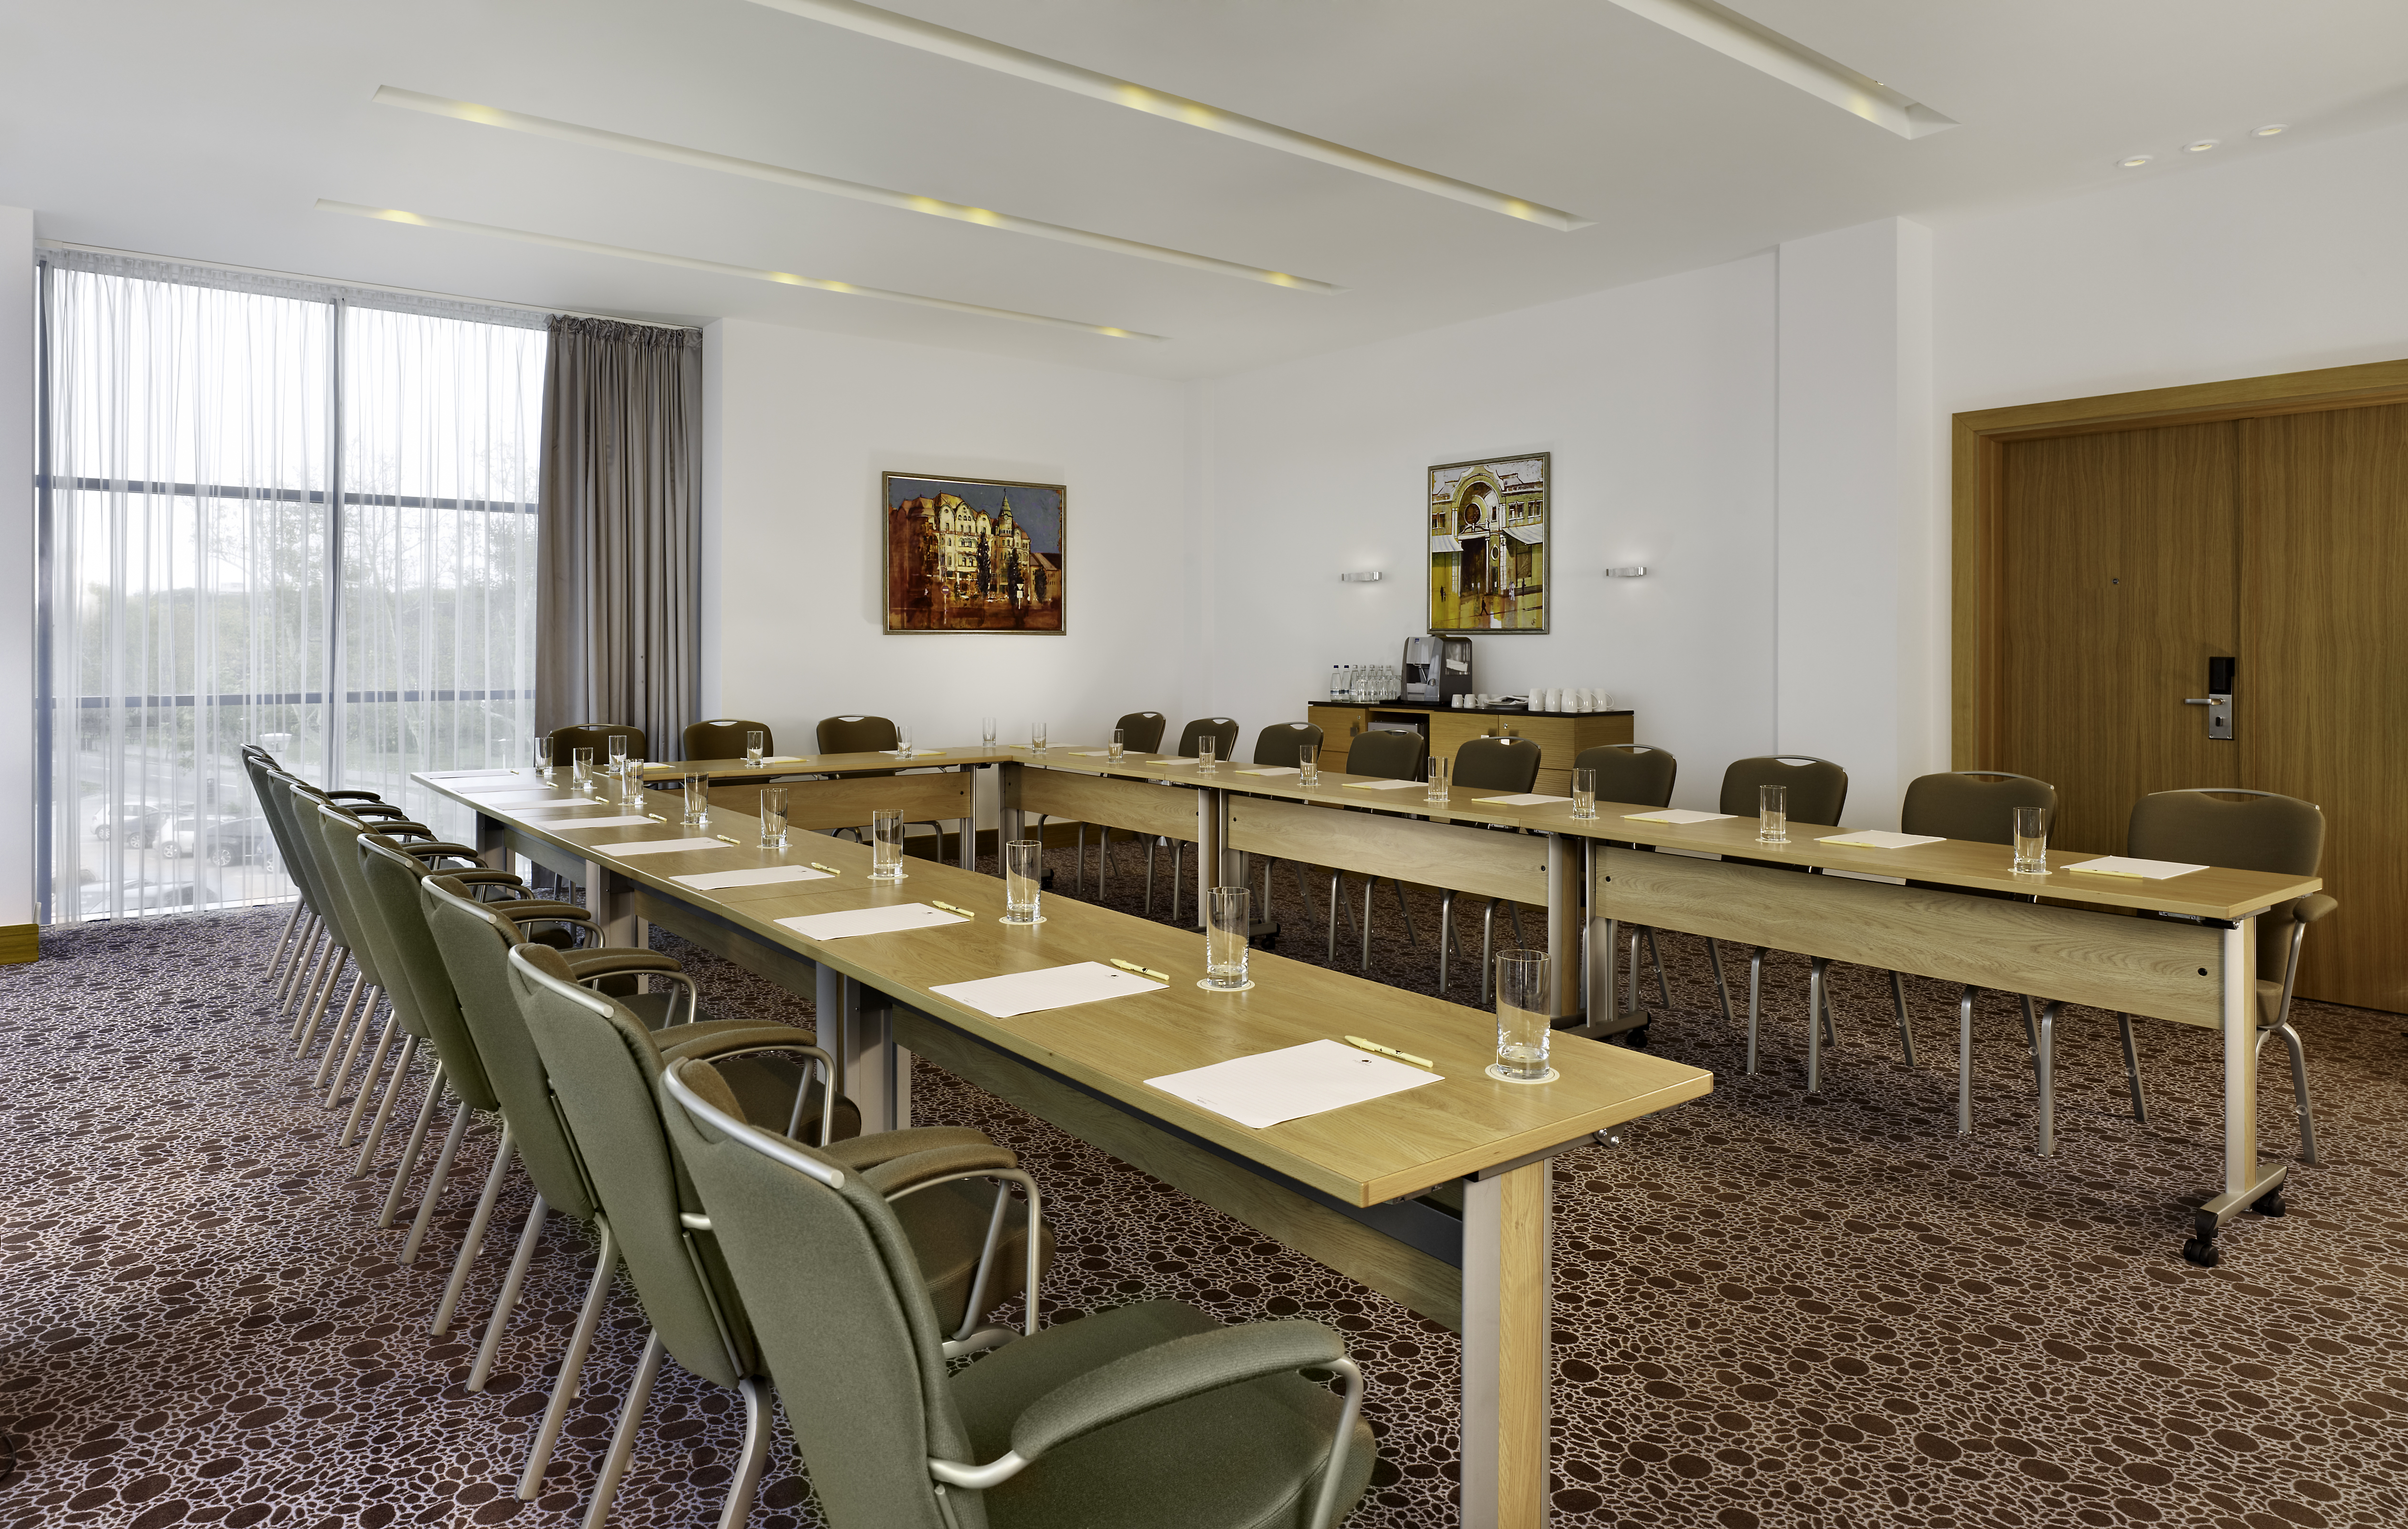 Donaris Meeting Room With Drinking Glasses, Notepads, Pens, and Seating for 21 at U-Shaped Table, Window With Sheer Drapes, Wall Art, Beverage Station and Entry Door